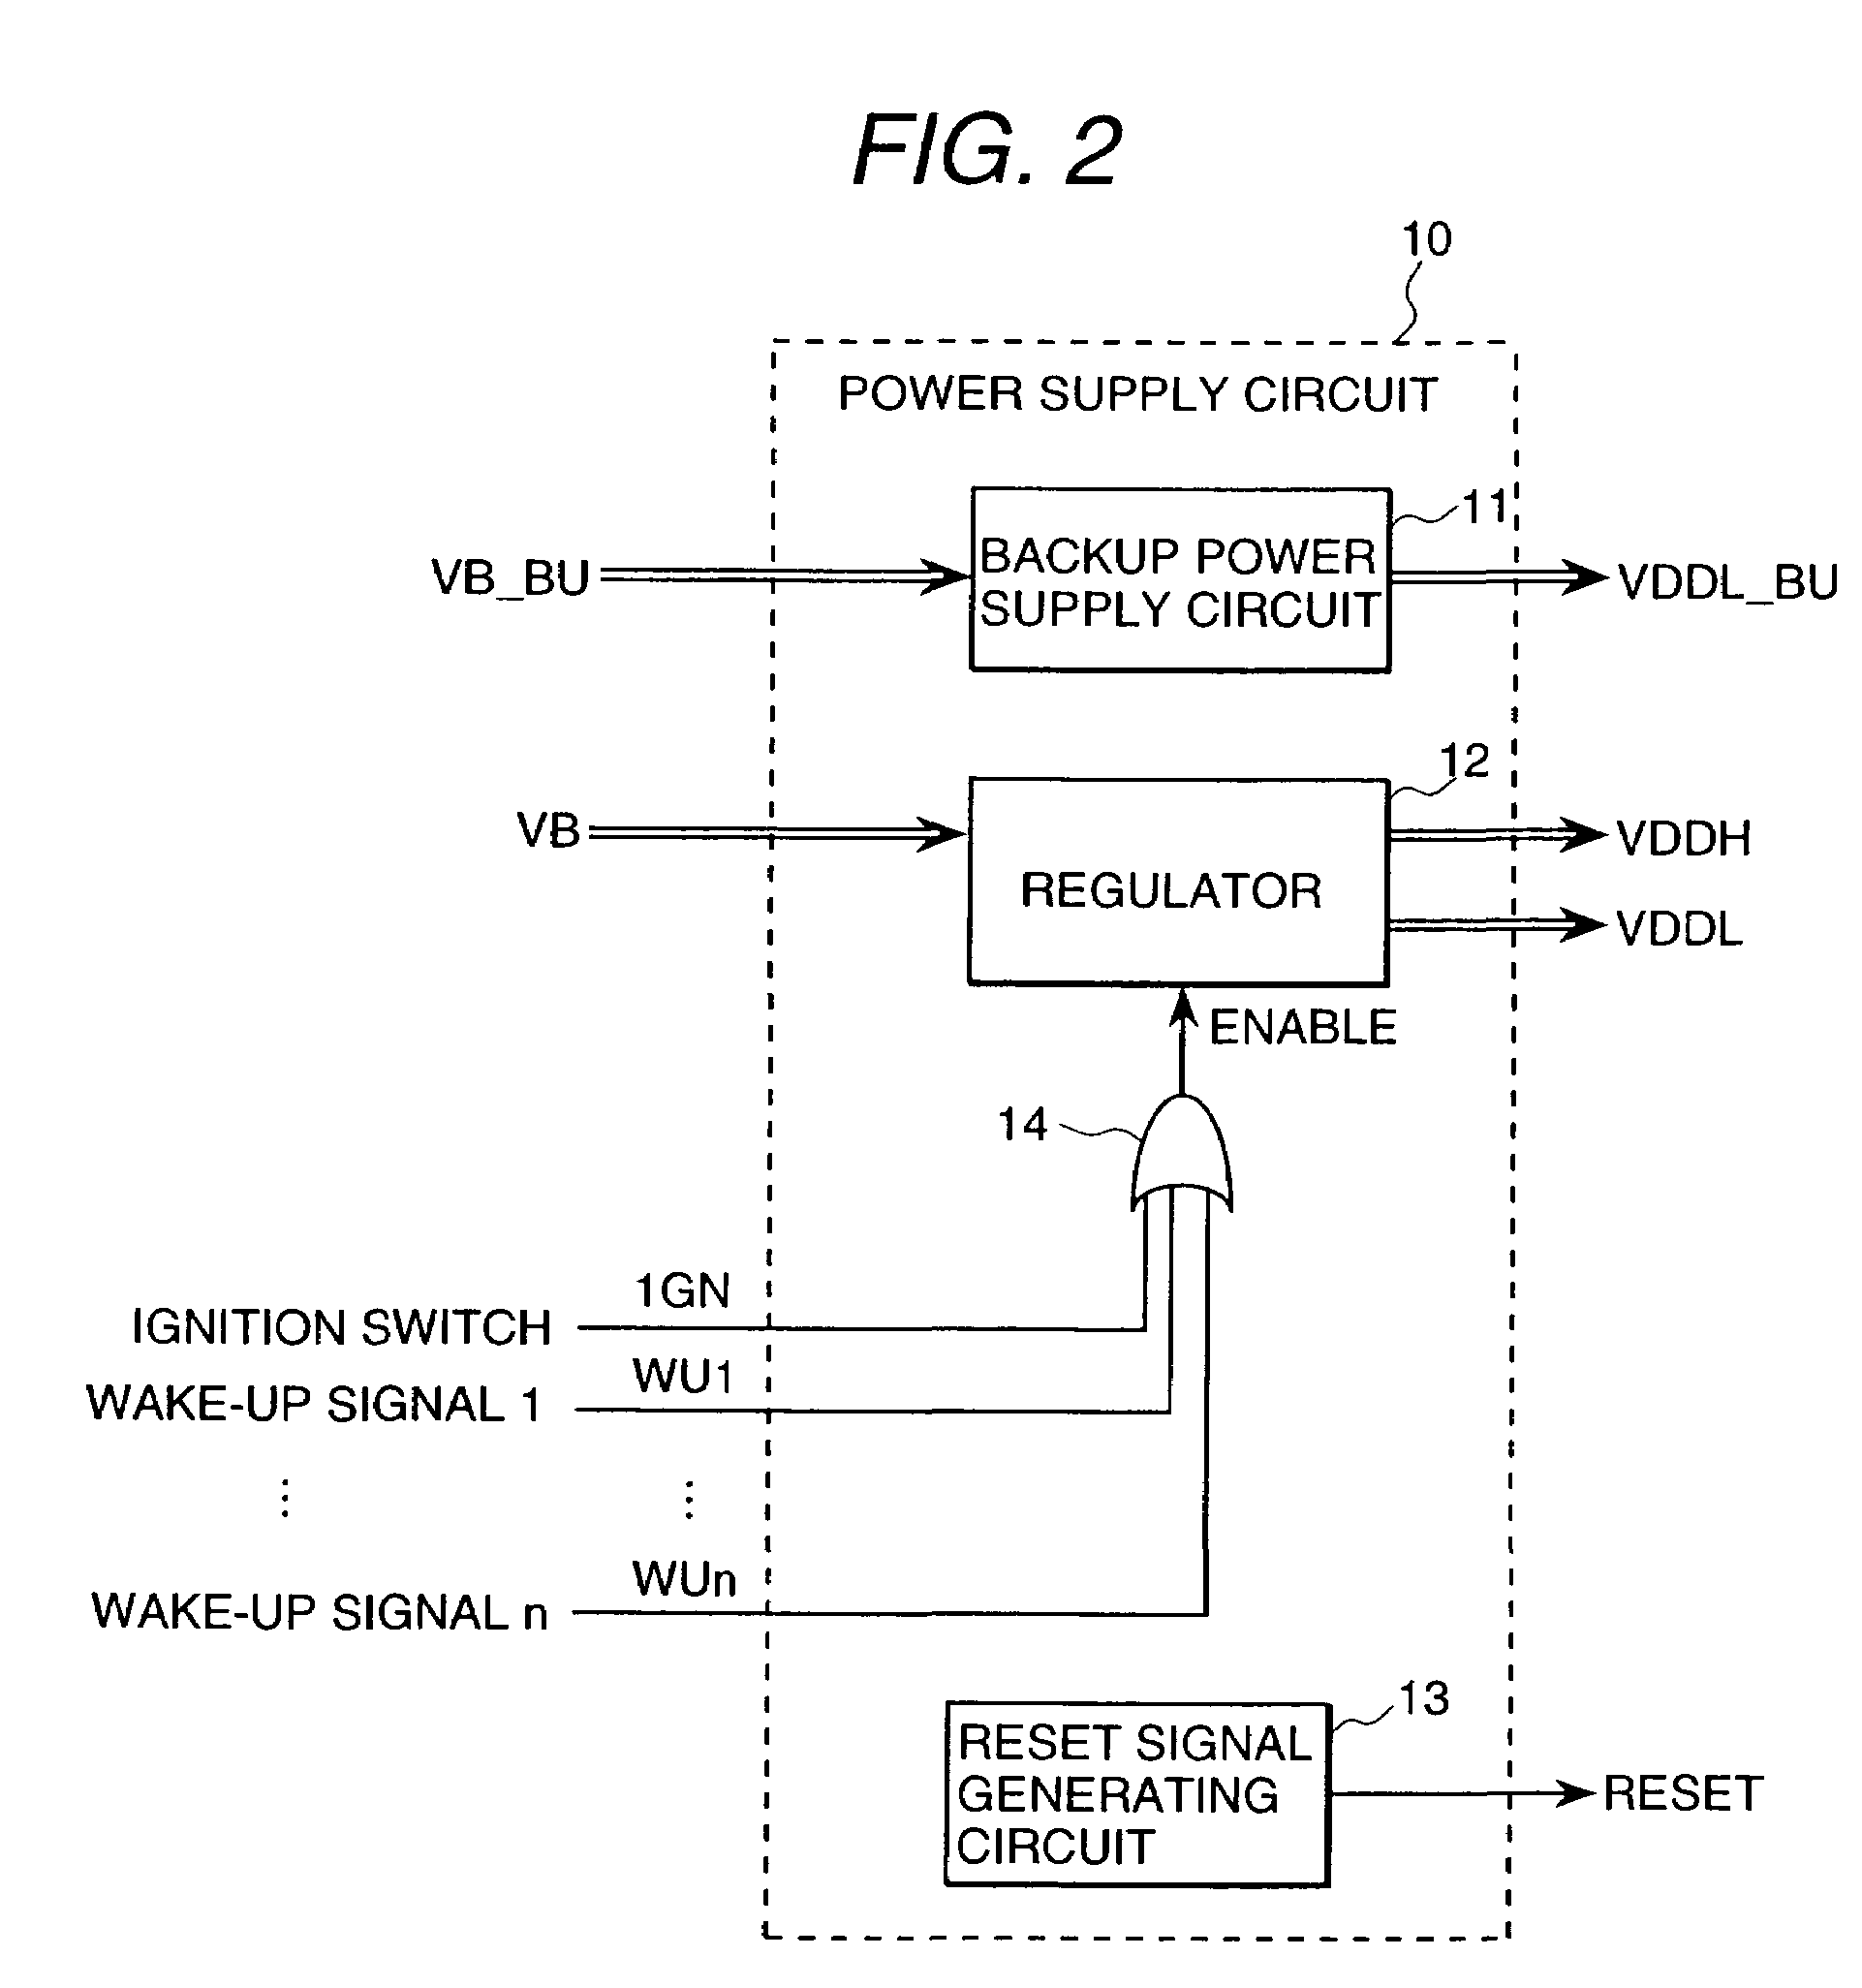 Electrical control unit for an automobile